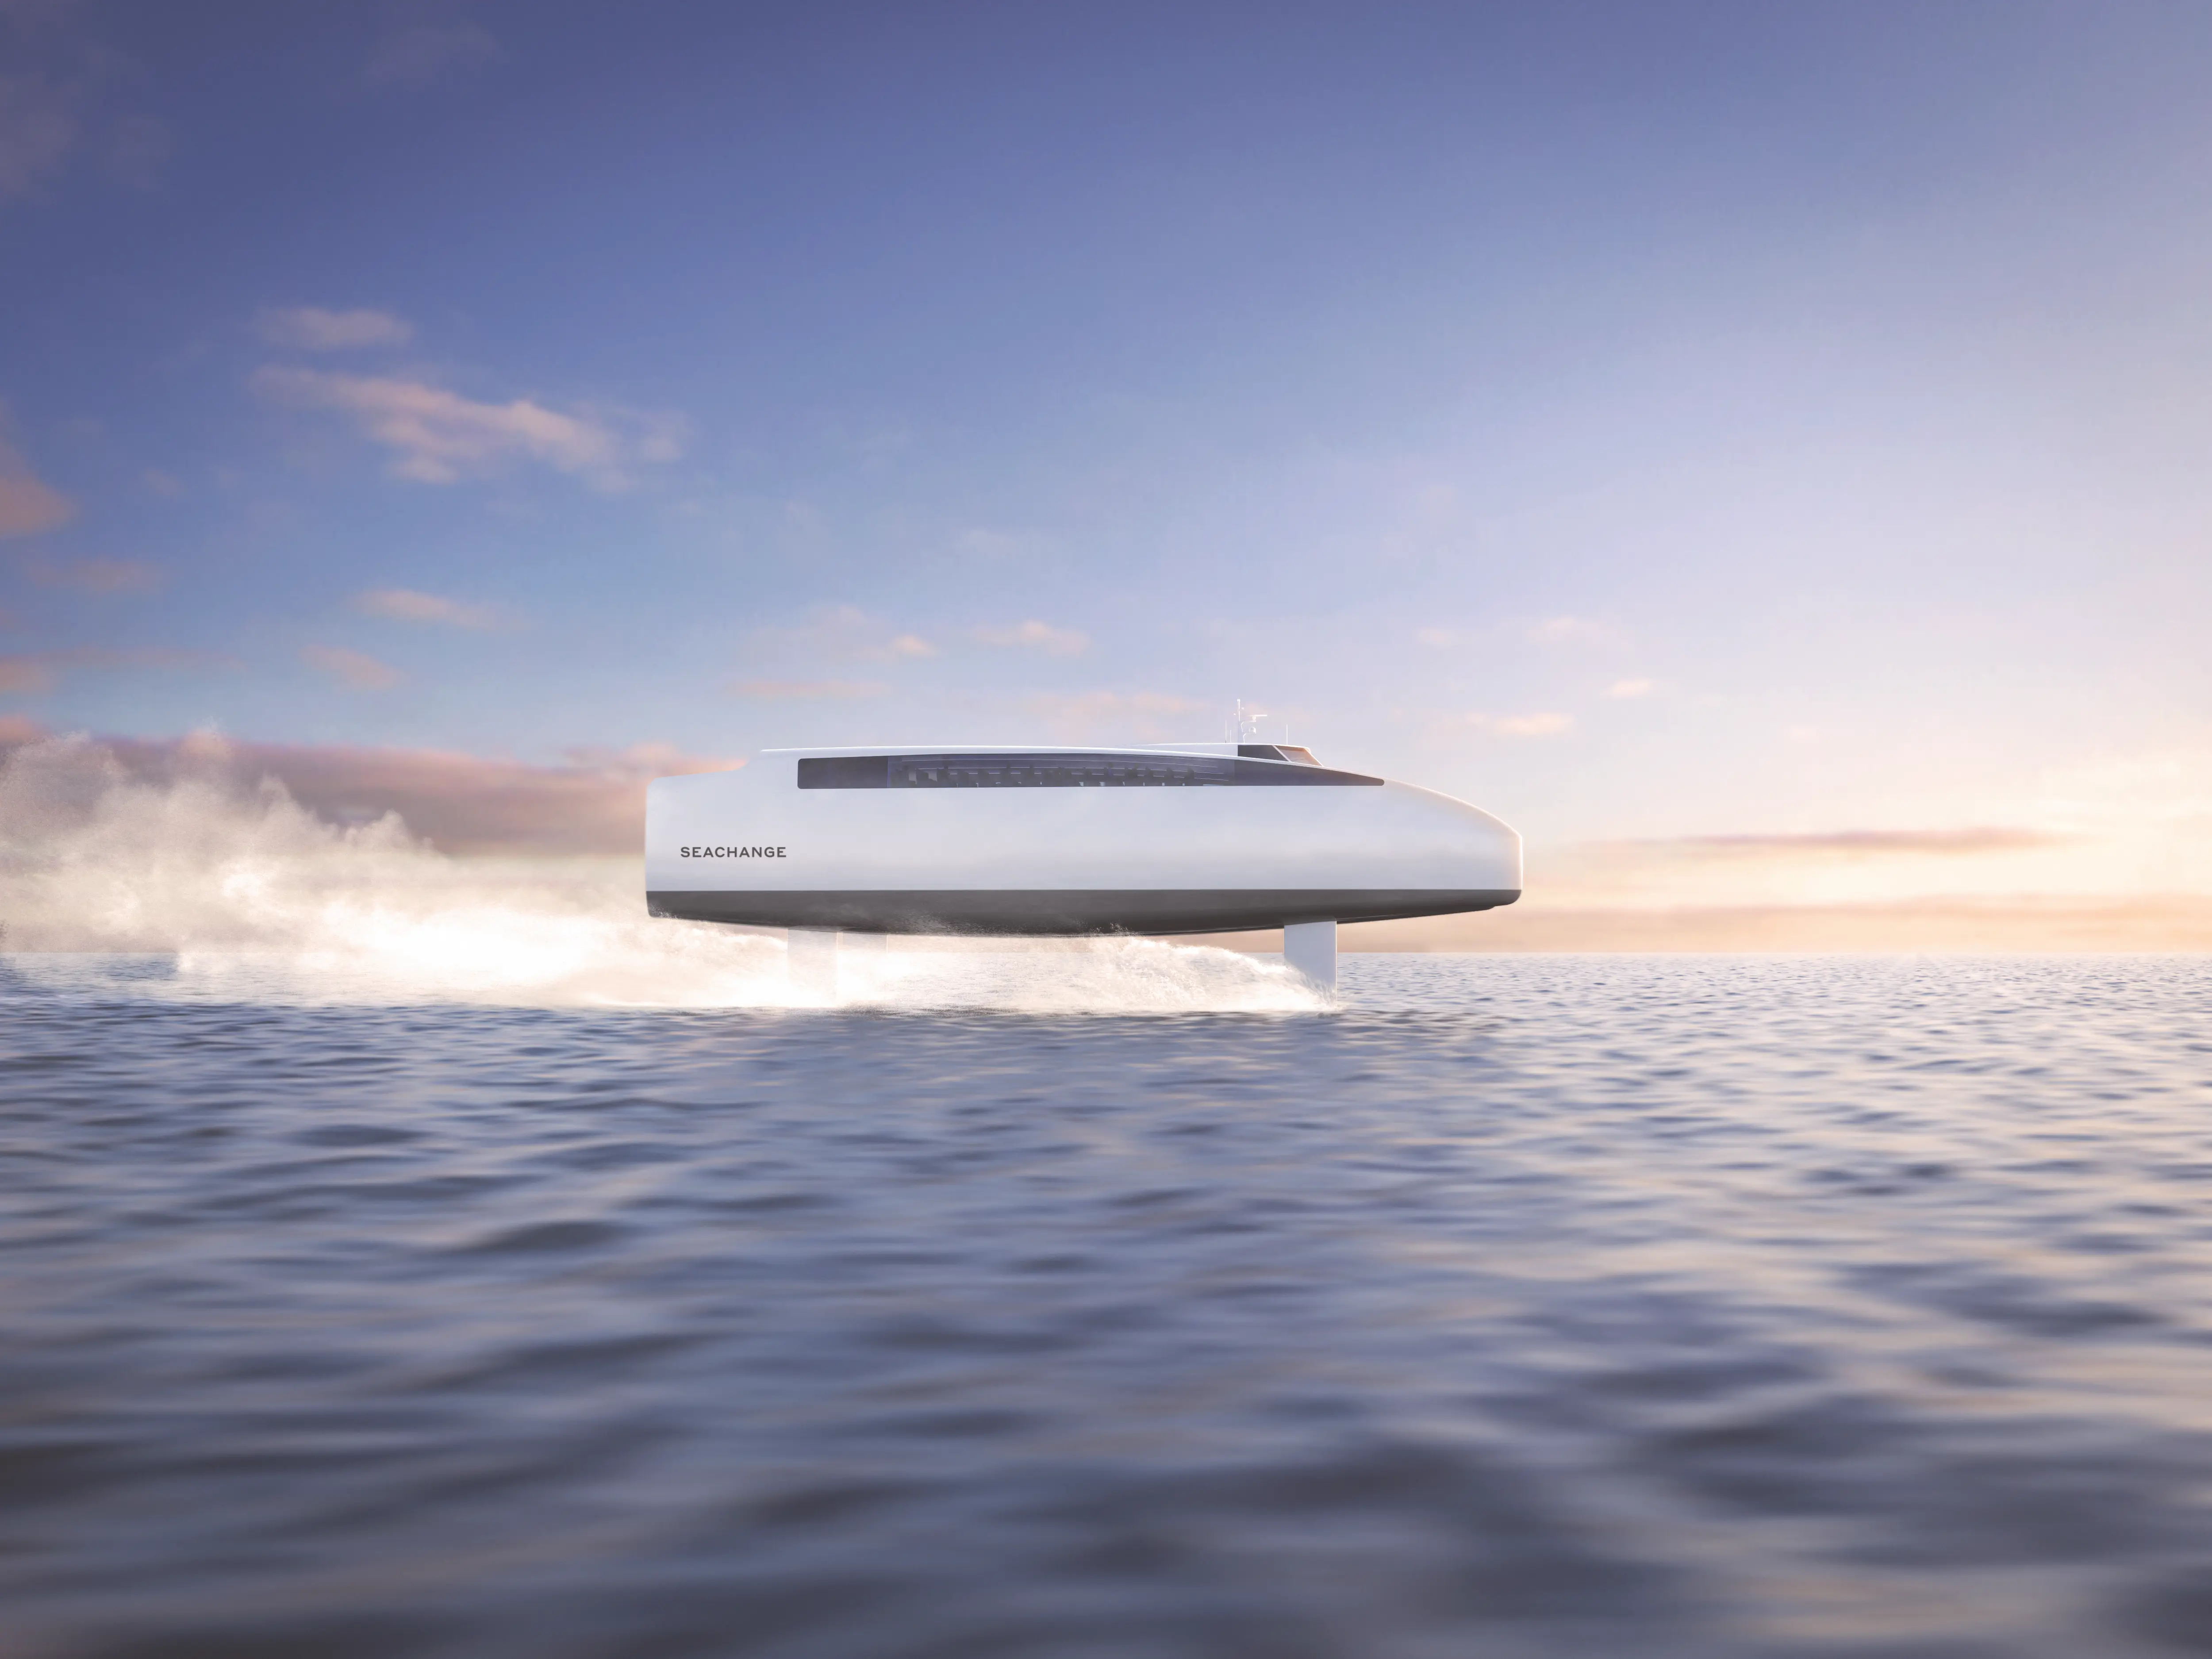 Computer render of the Seachange hydrofoiling ferry